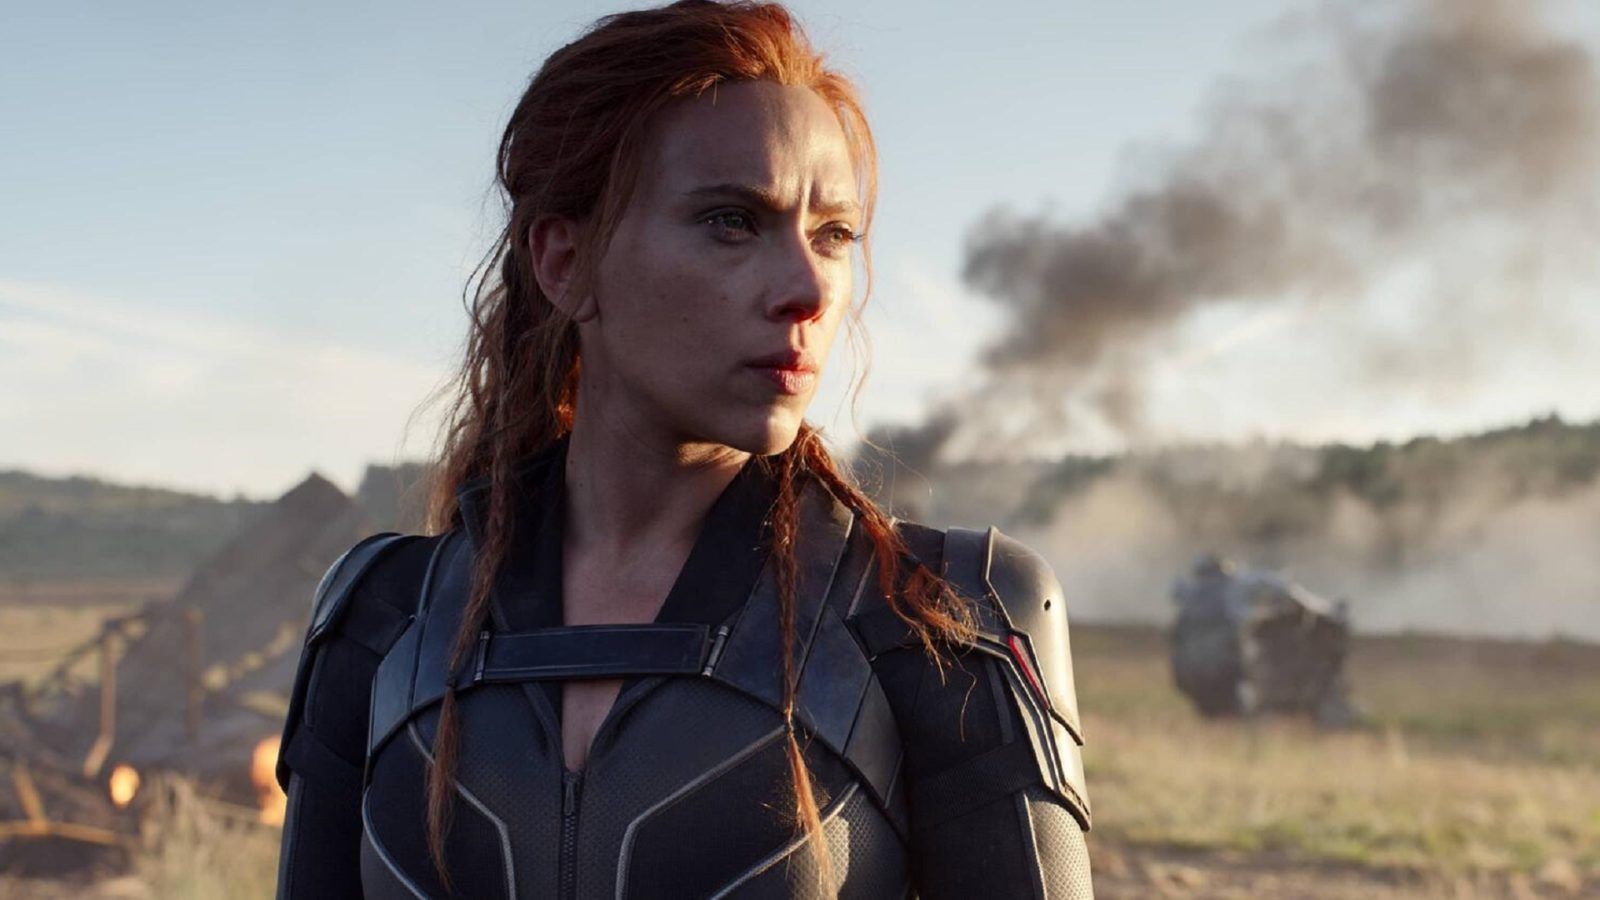 10 things you may have not known about Marvel’s Black Widow